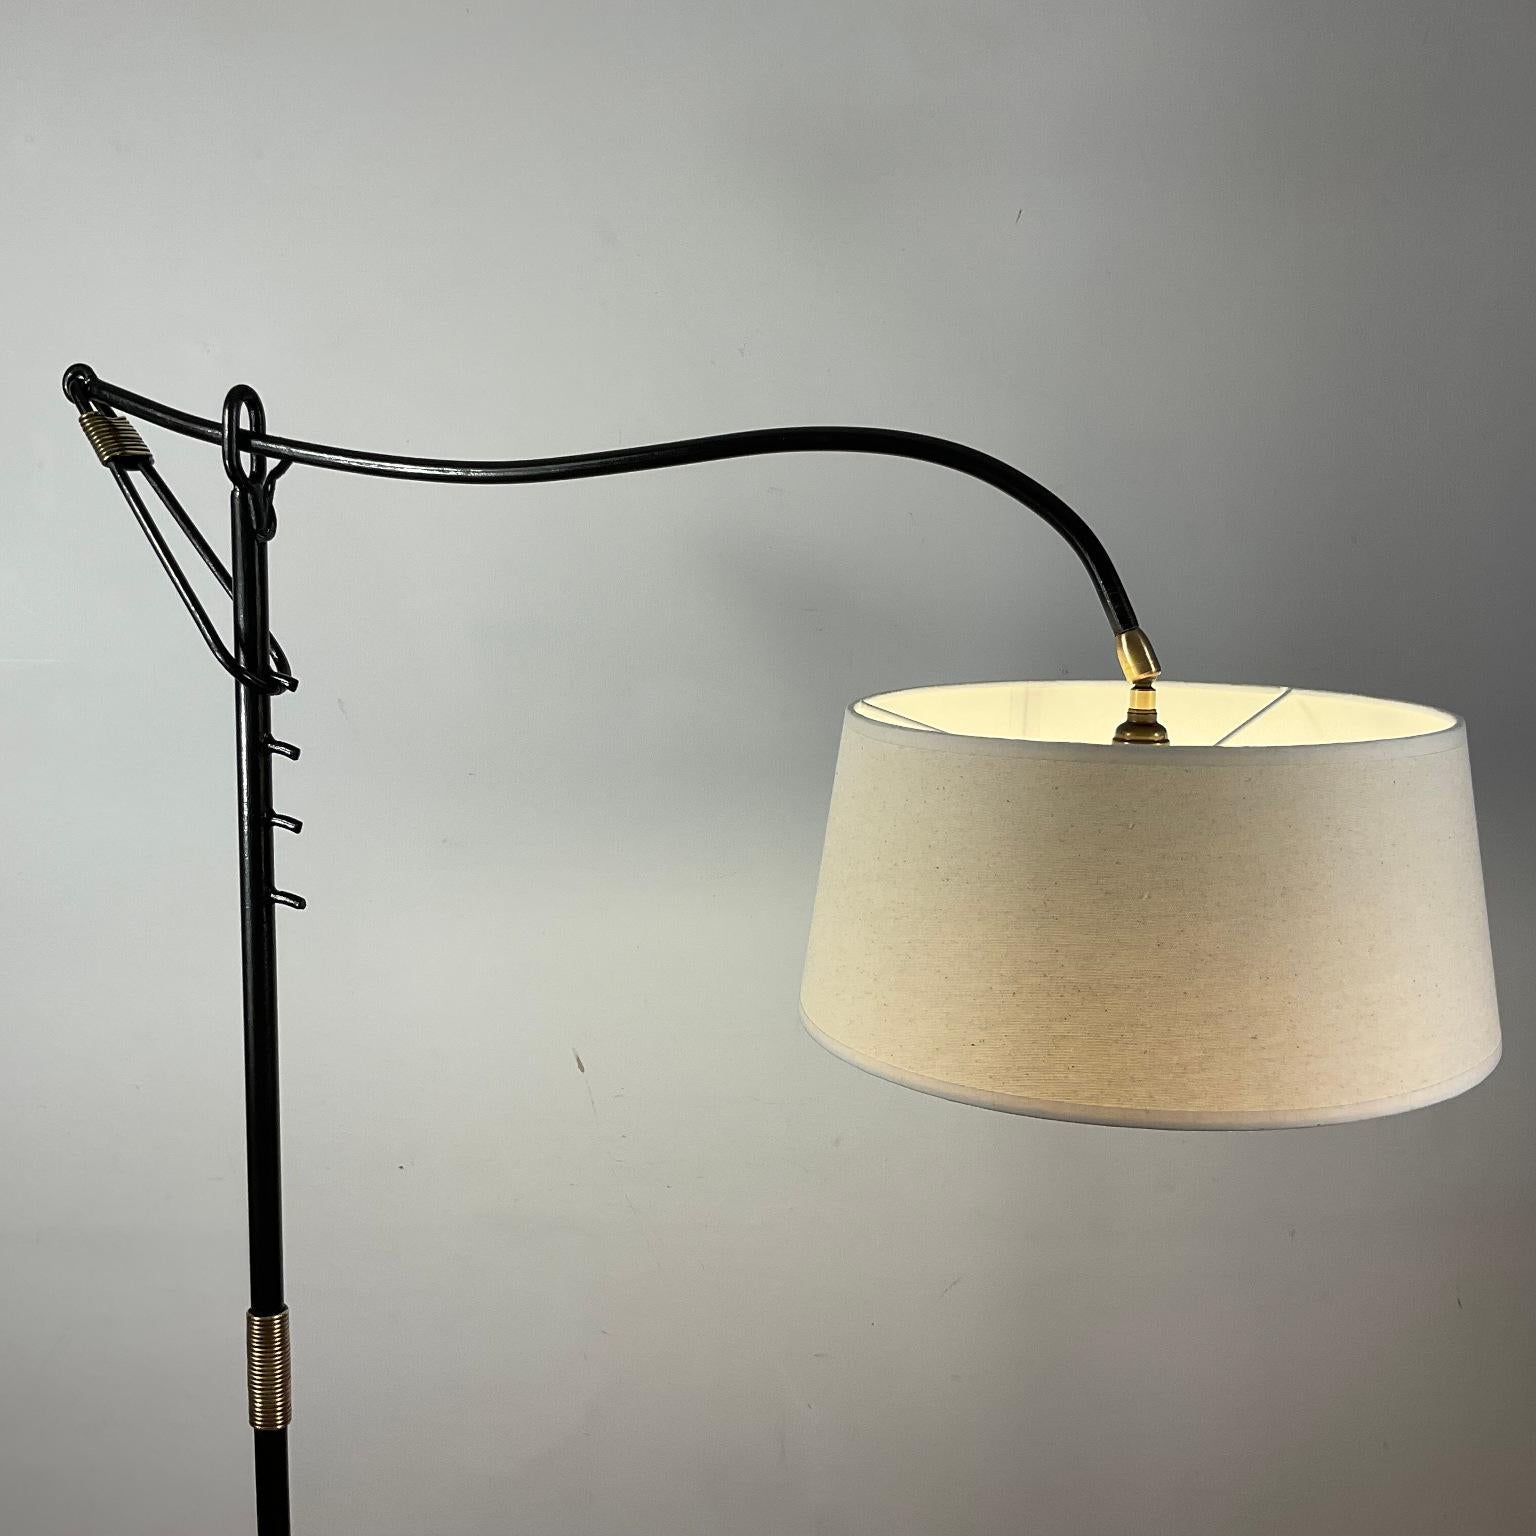 French 1950s Floor Lamp Attributed to Jacques Adnet with a Crémallière system For Sale